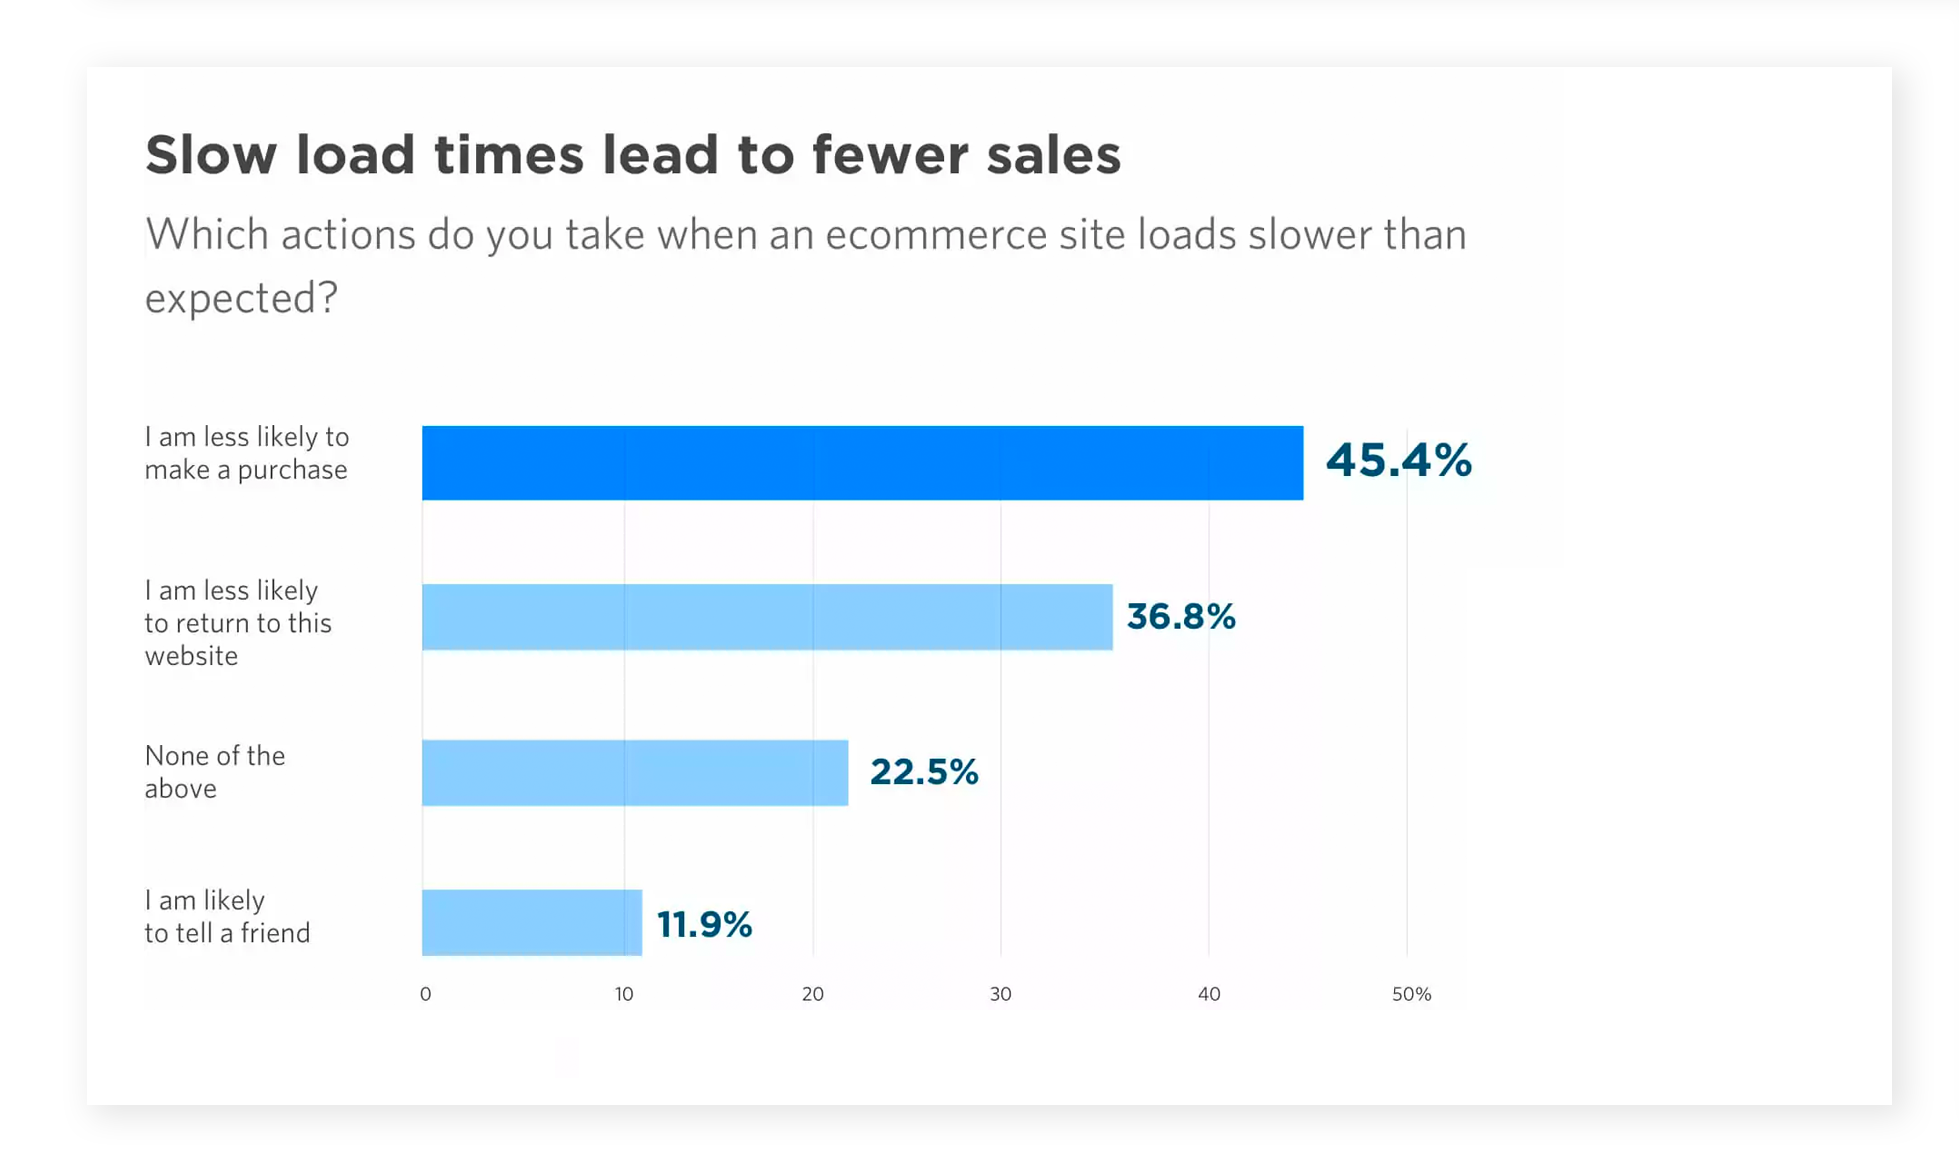 Slow page loading speeds lead to fewer sales